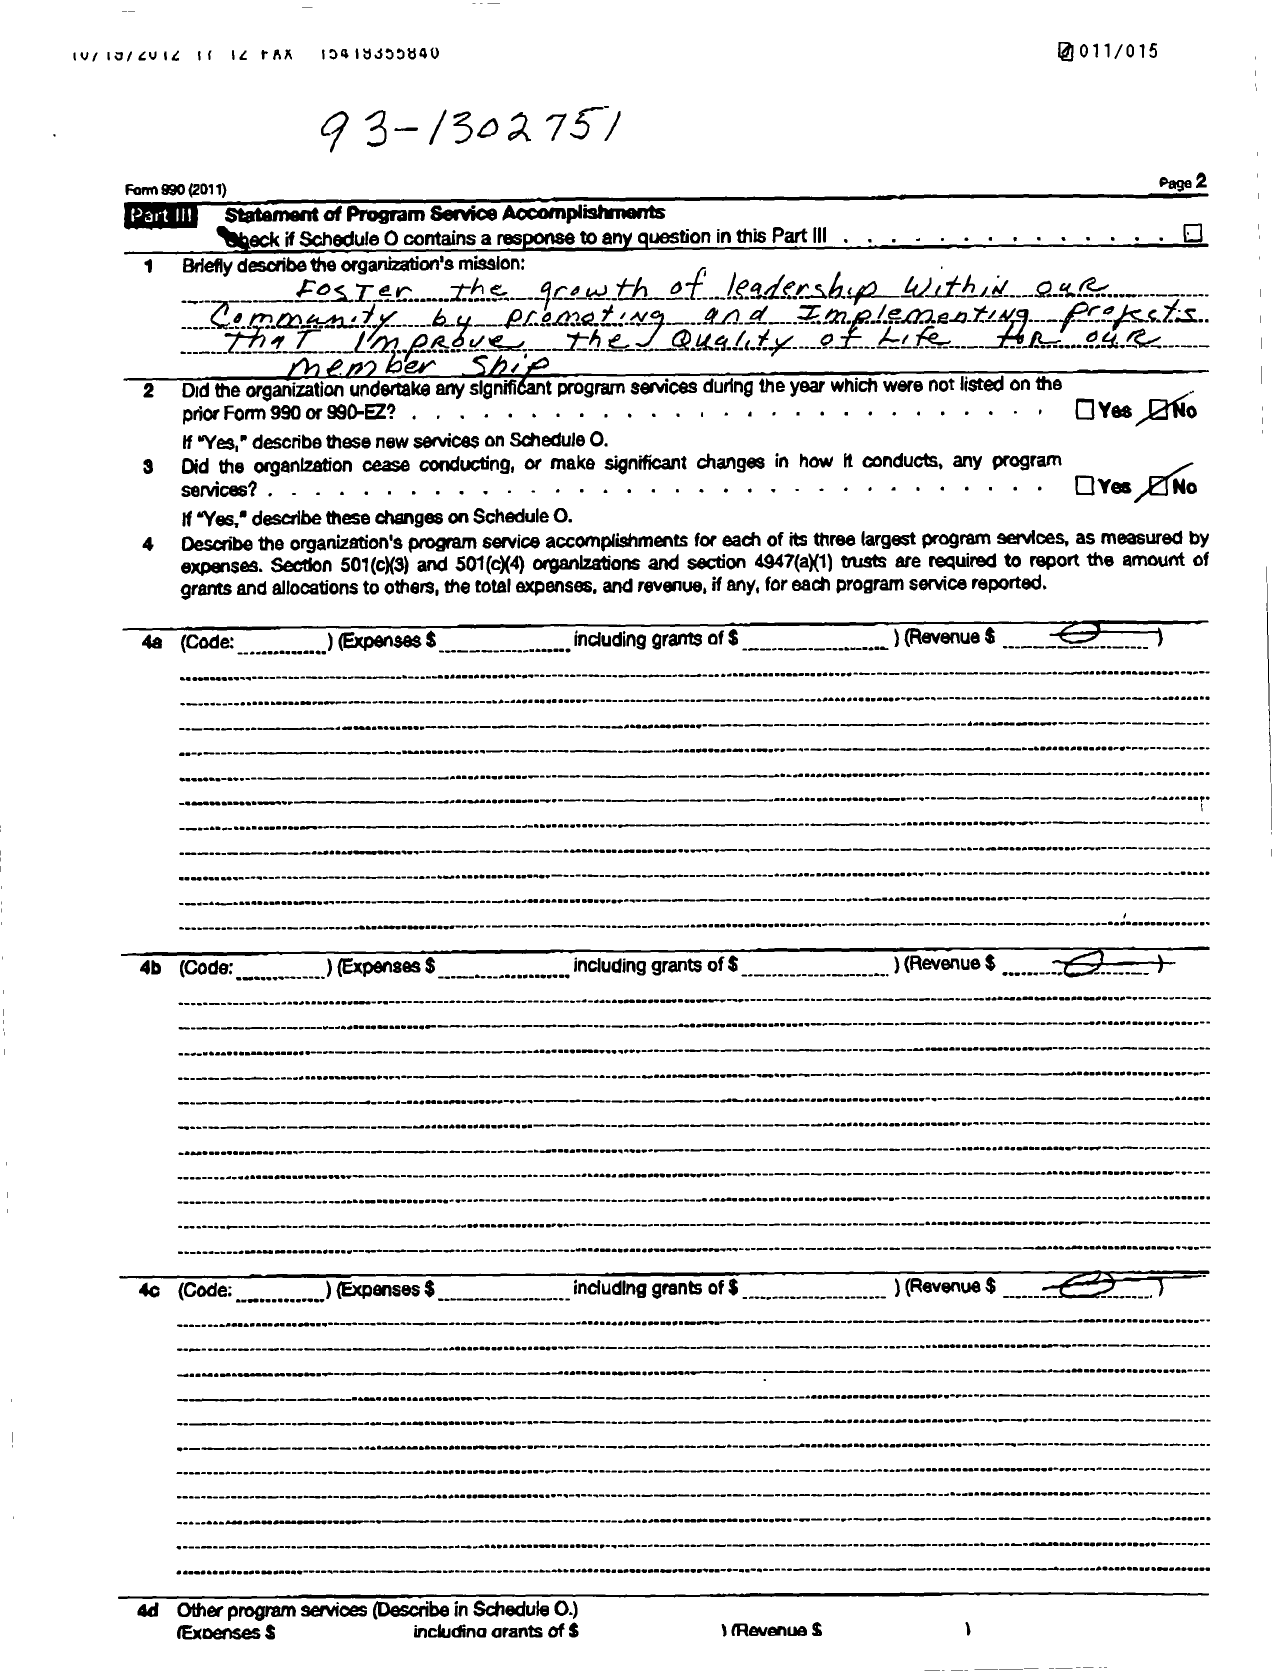 Image of first page of 2011 Form 990R for Fern Ridge Community Partnership